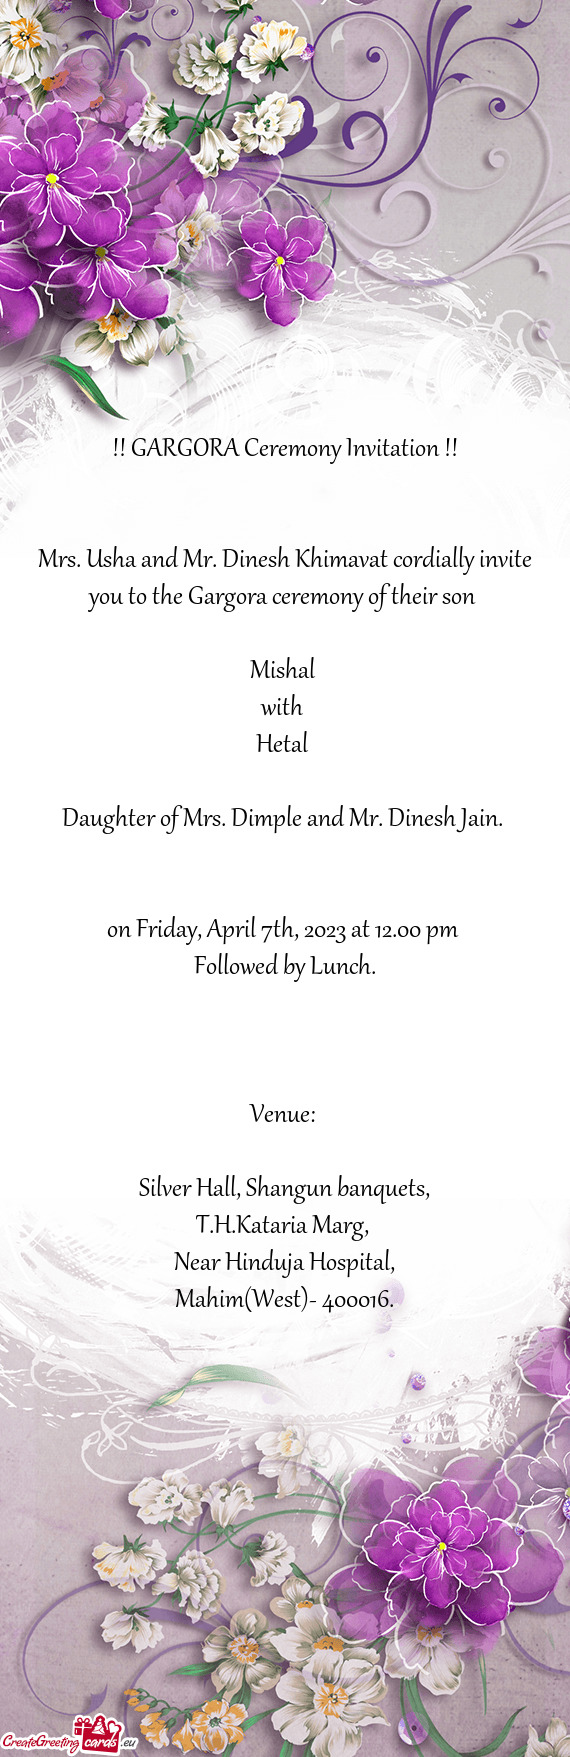 Mrs. Usha and Mr. Dinesh Khimavat cordially invite you to the Gargora ceremony of their son